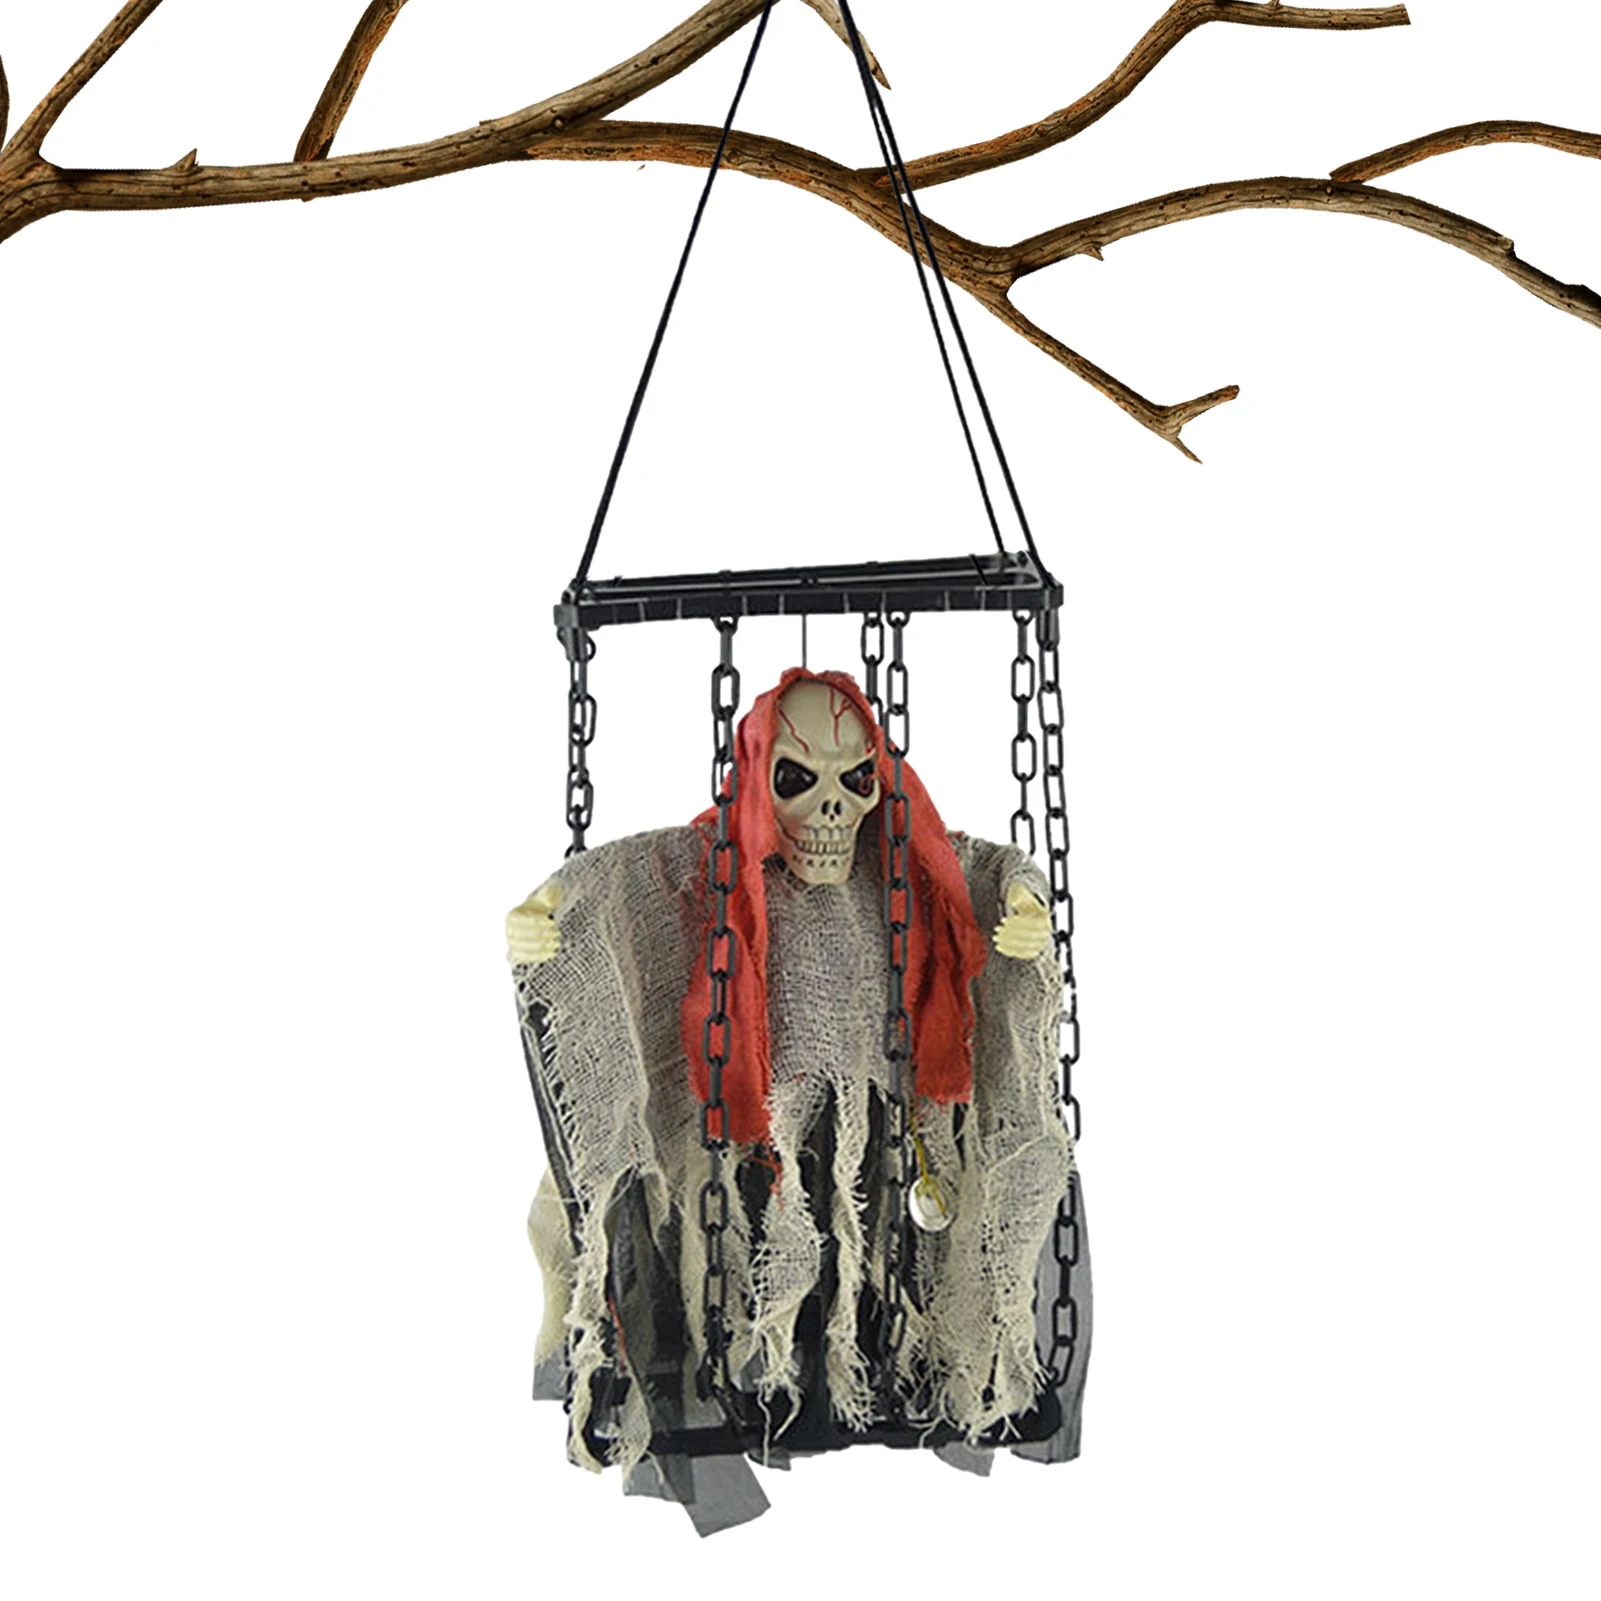 

Halloween Skeleton Fun Scary Ghost Decoration Hanging Halloween Decor With Glowing Eyes And Creepy Sound Skeleton Ghosts